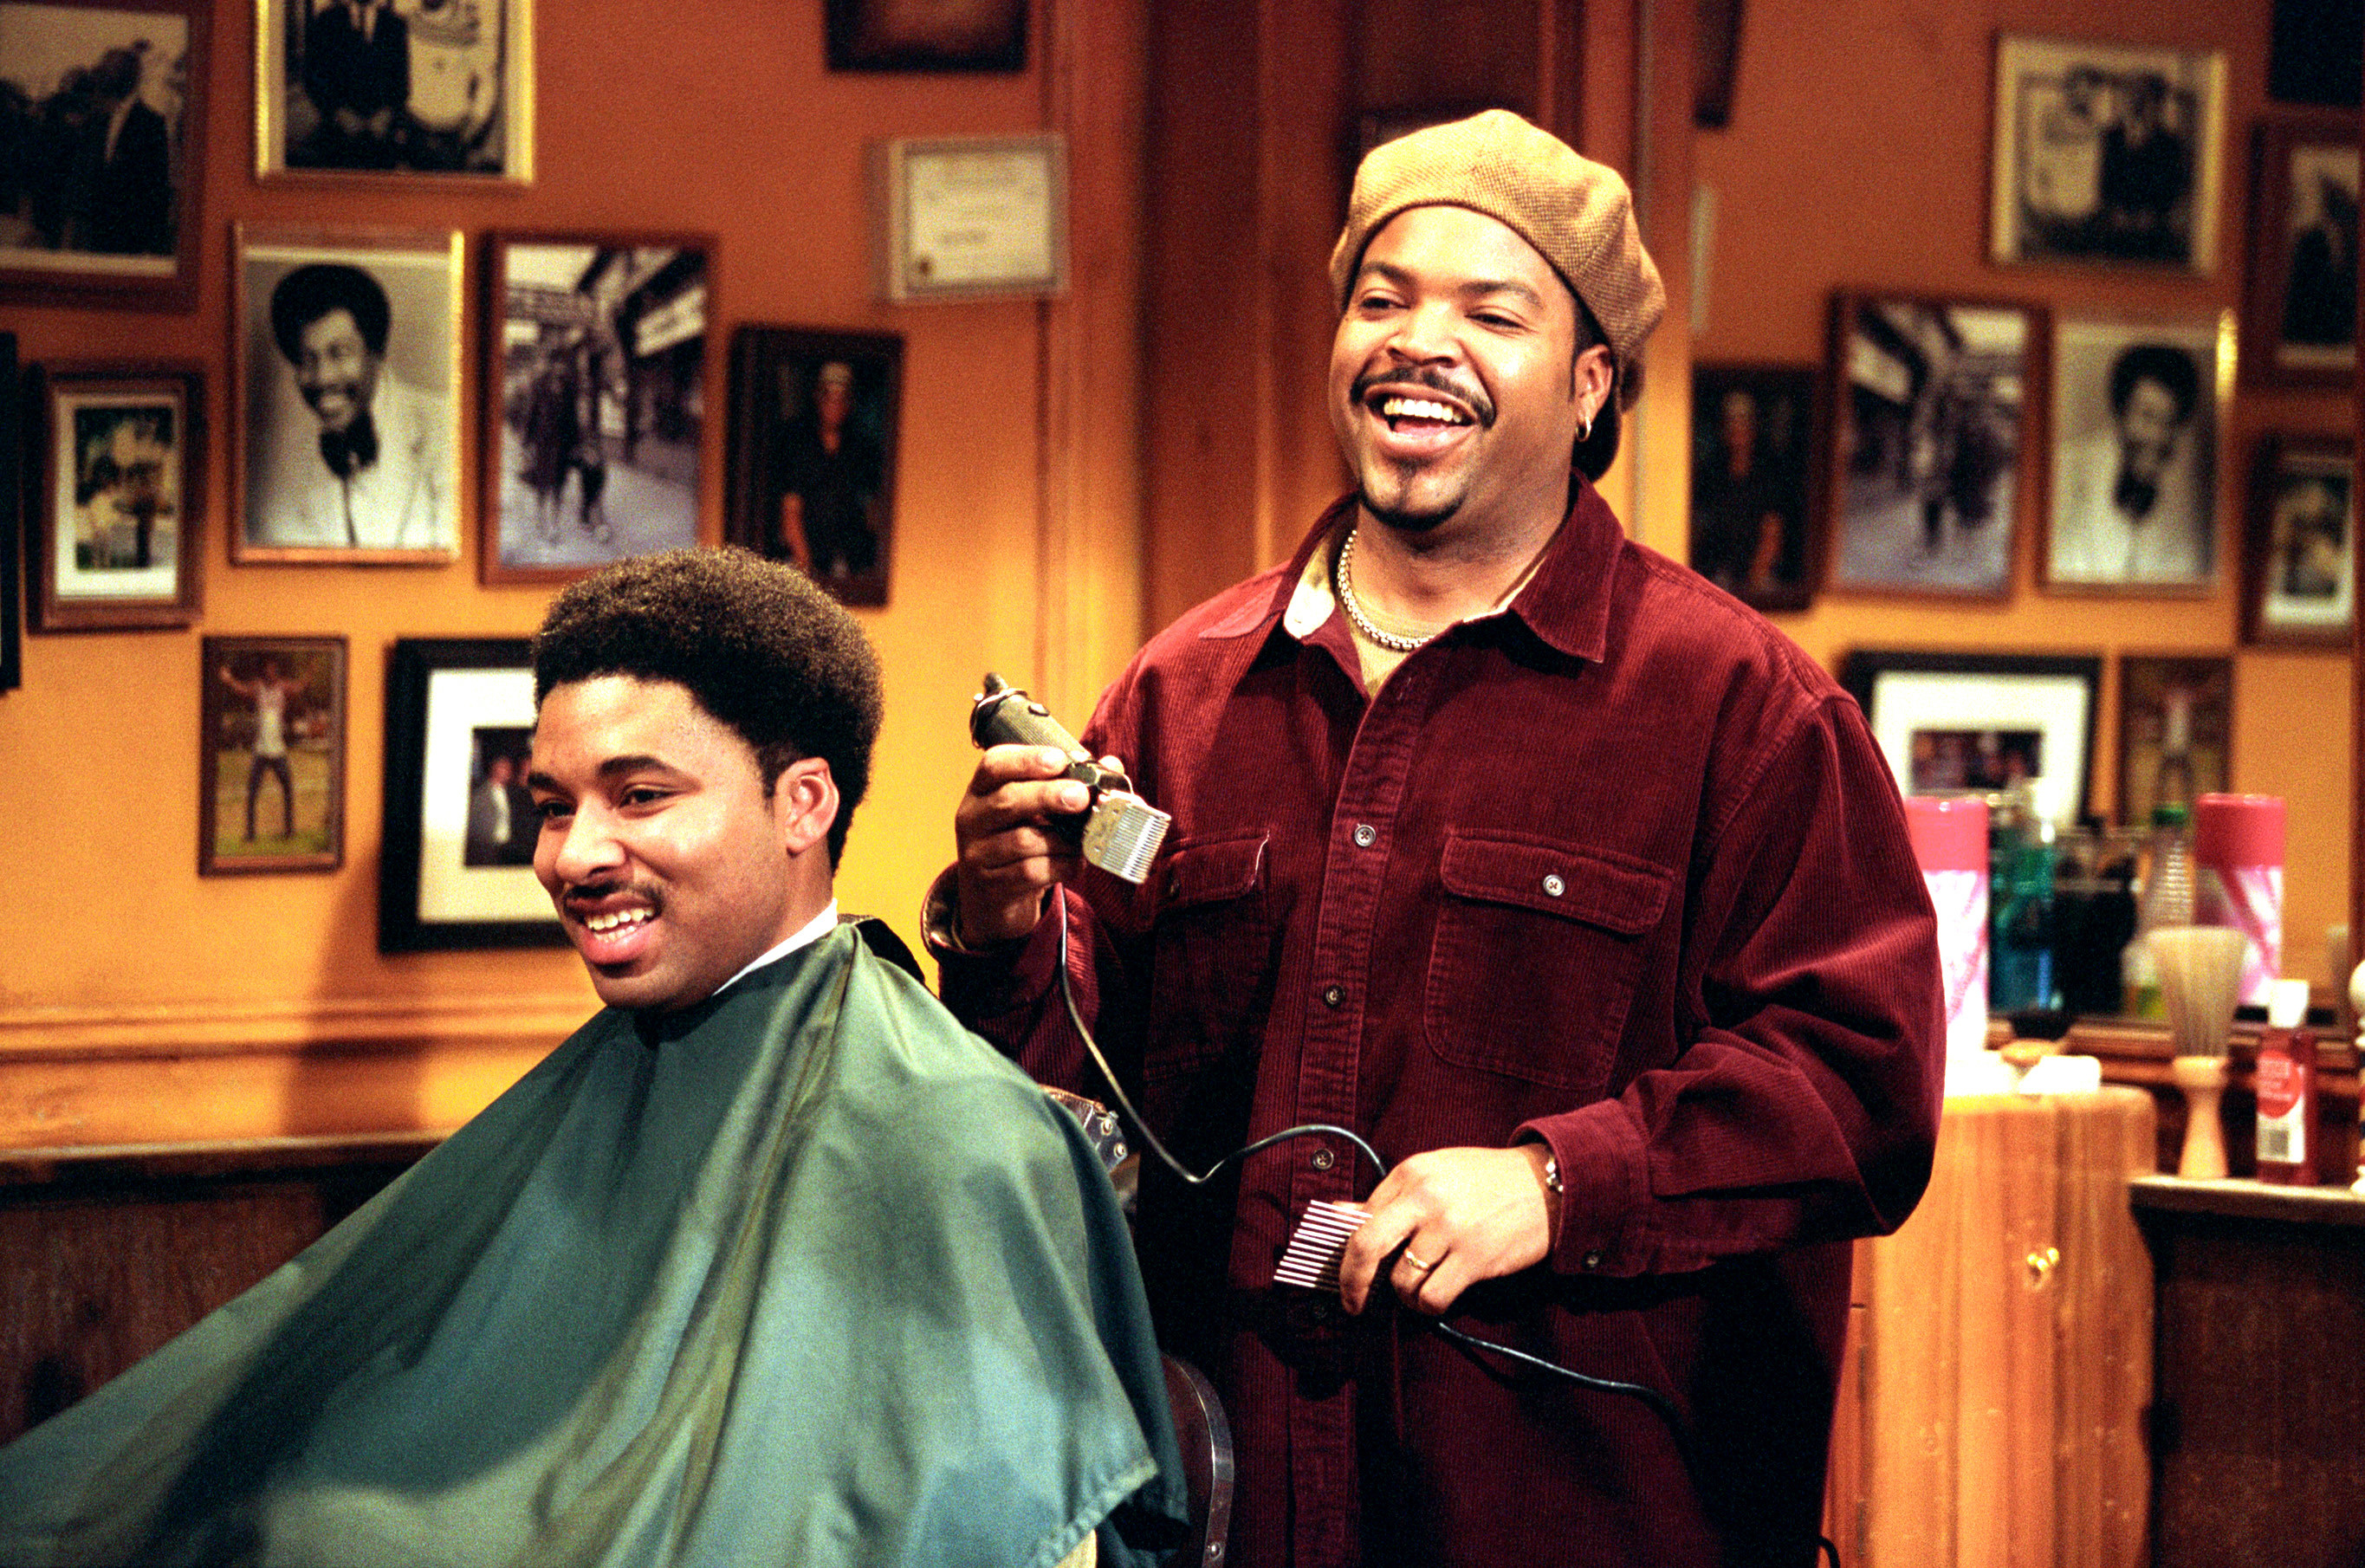 Ice Cube stands in a barber shop cutting hair